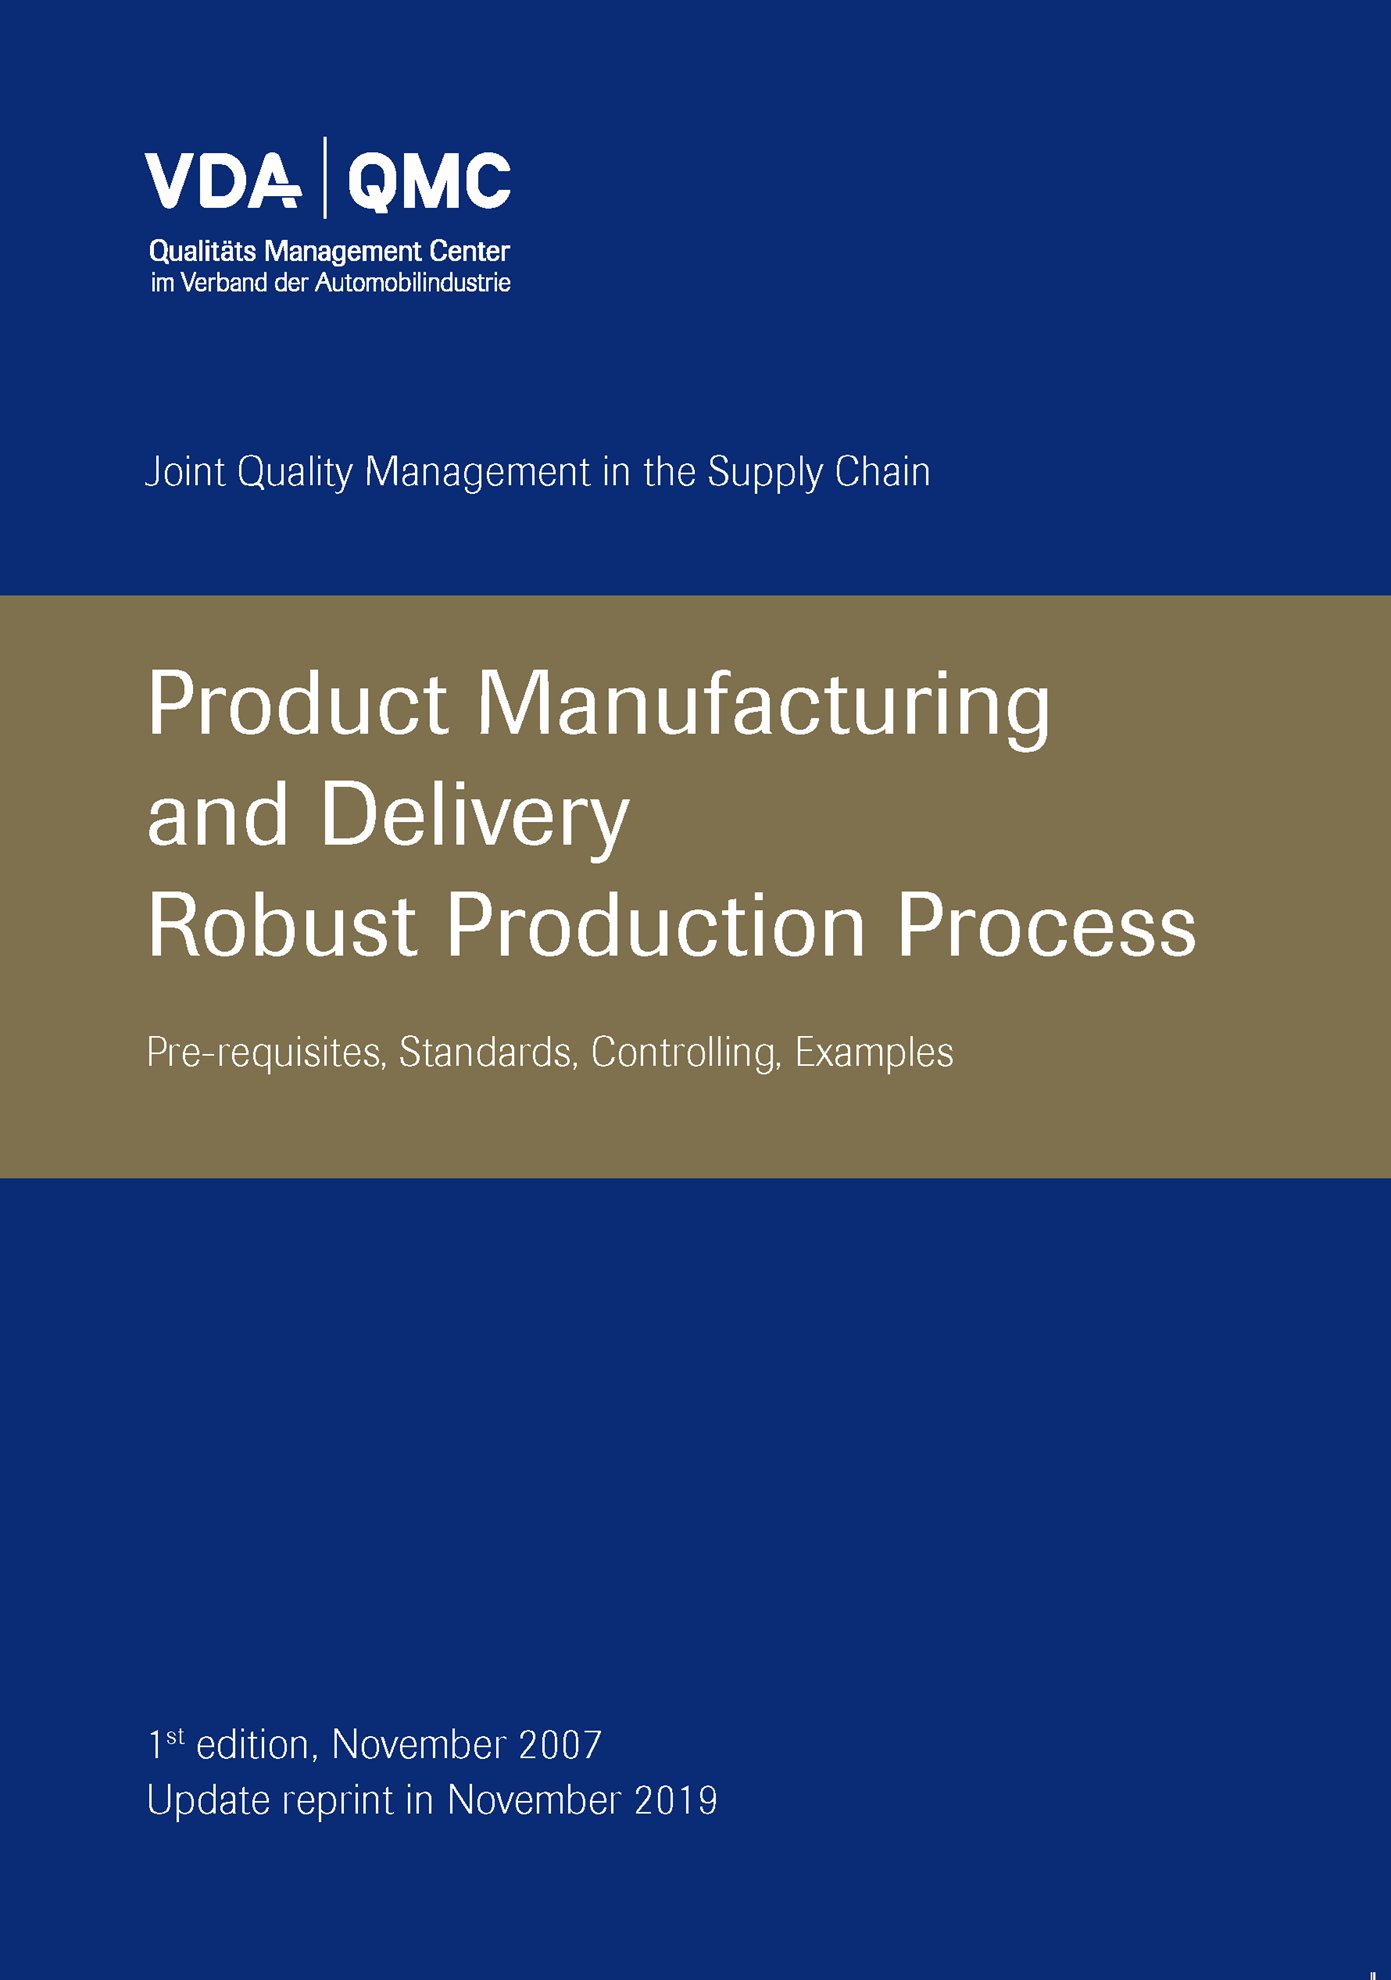 Publikace  VDA Product Manufacturing and Delivery
 · Robust Production Process
 Prerequisites, Standards, Controlling, Examples
 1st edition November 2007 - Updated reprint, November 2019 1.11.2019 náhled